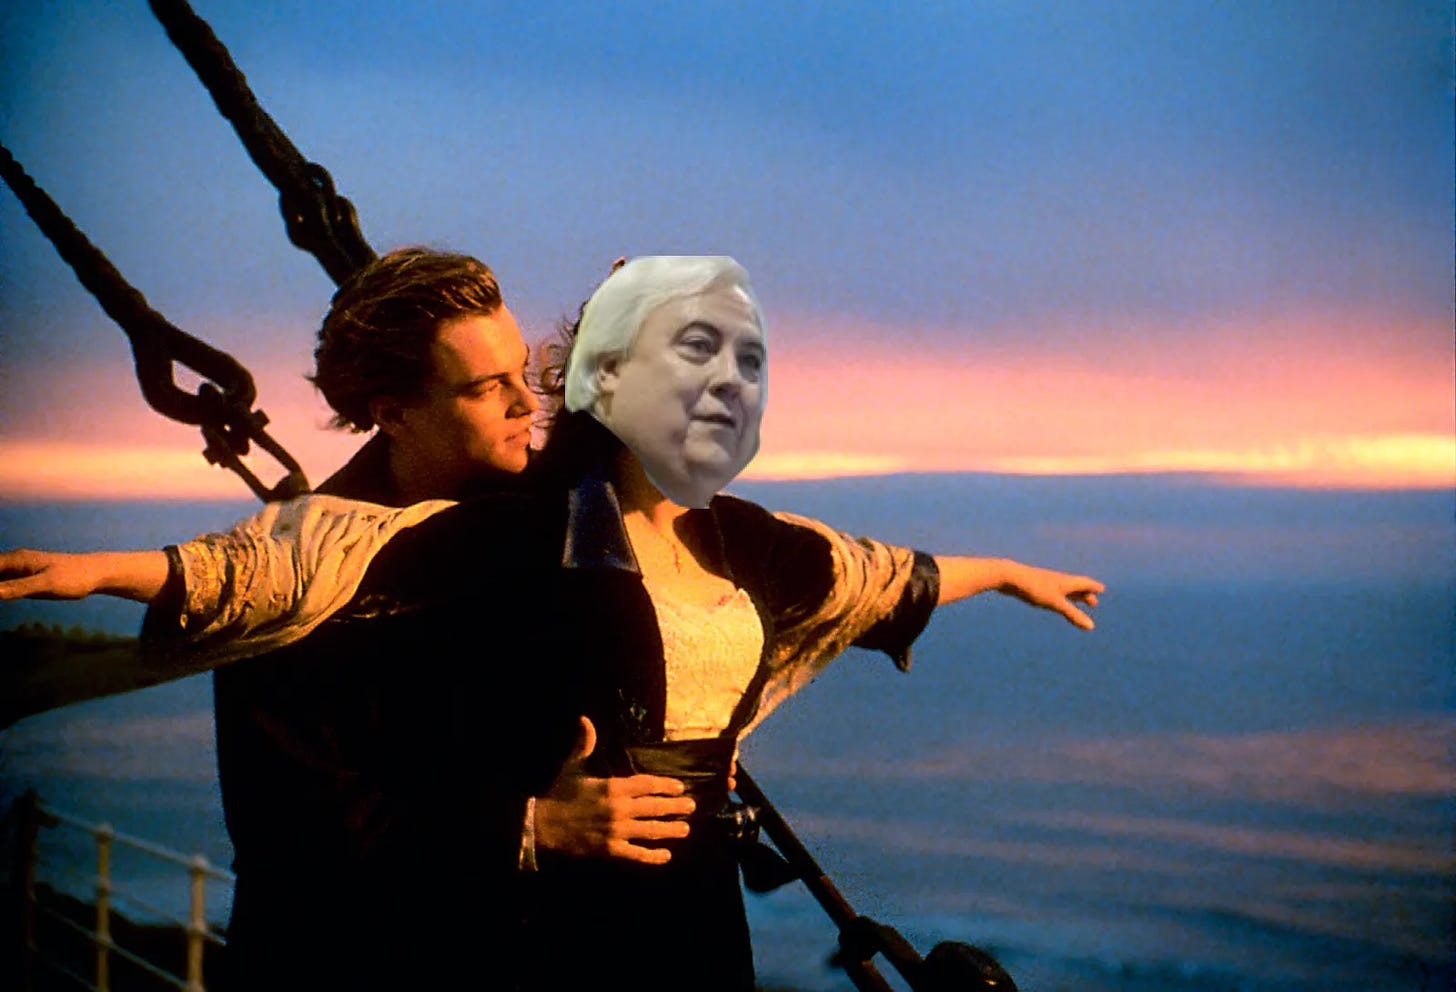 The bow of the boat scene from Titanic with Jack holding Rose with her arms outstretched, but with Clive Palmer's face over Rose's